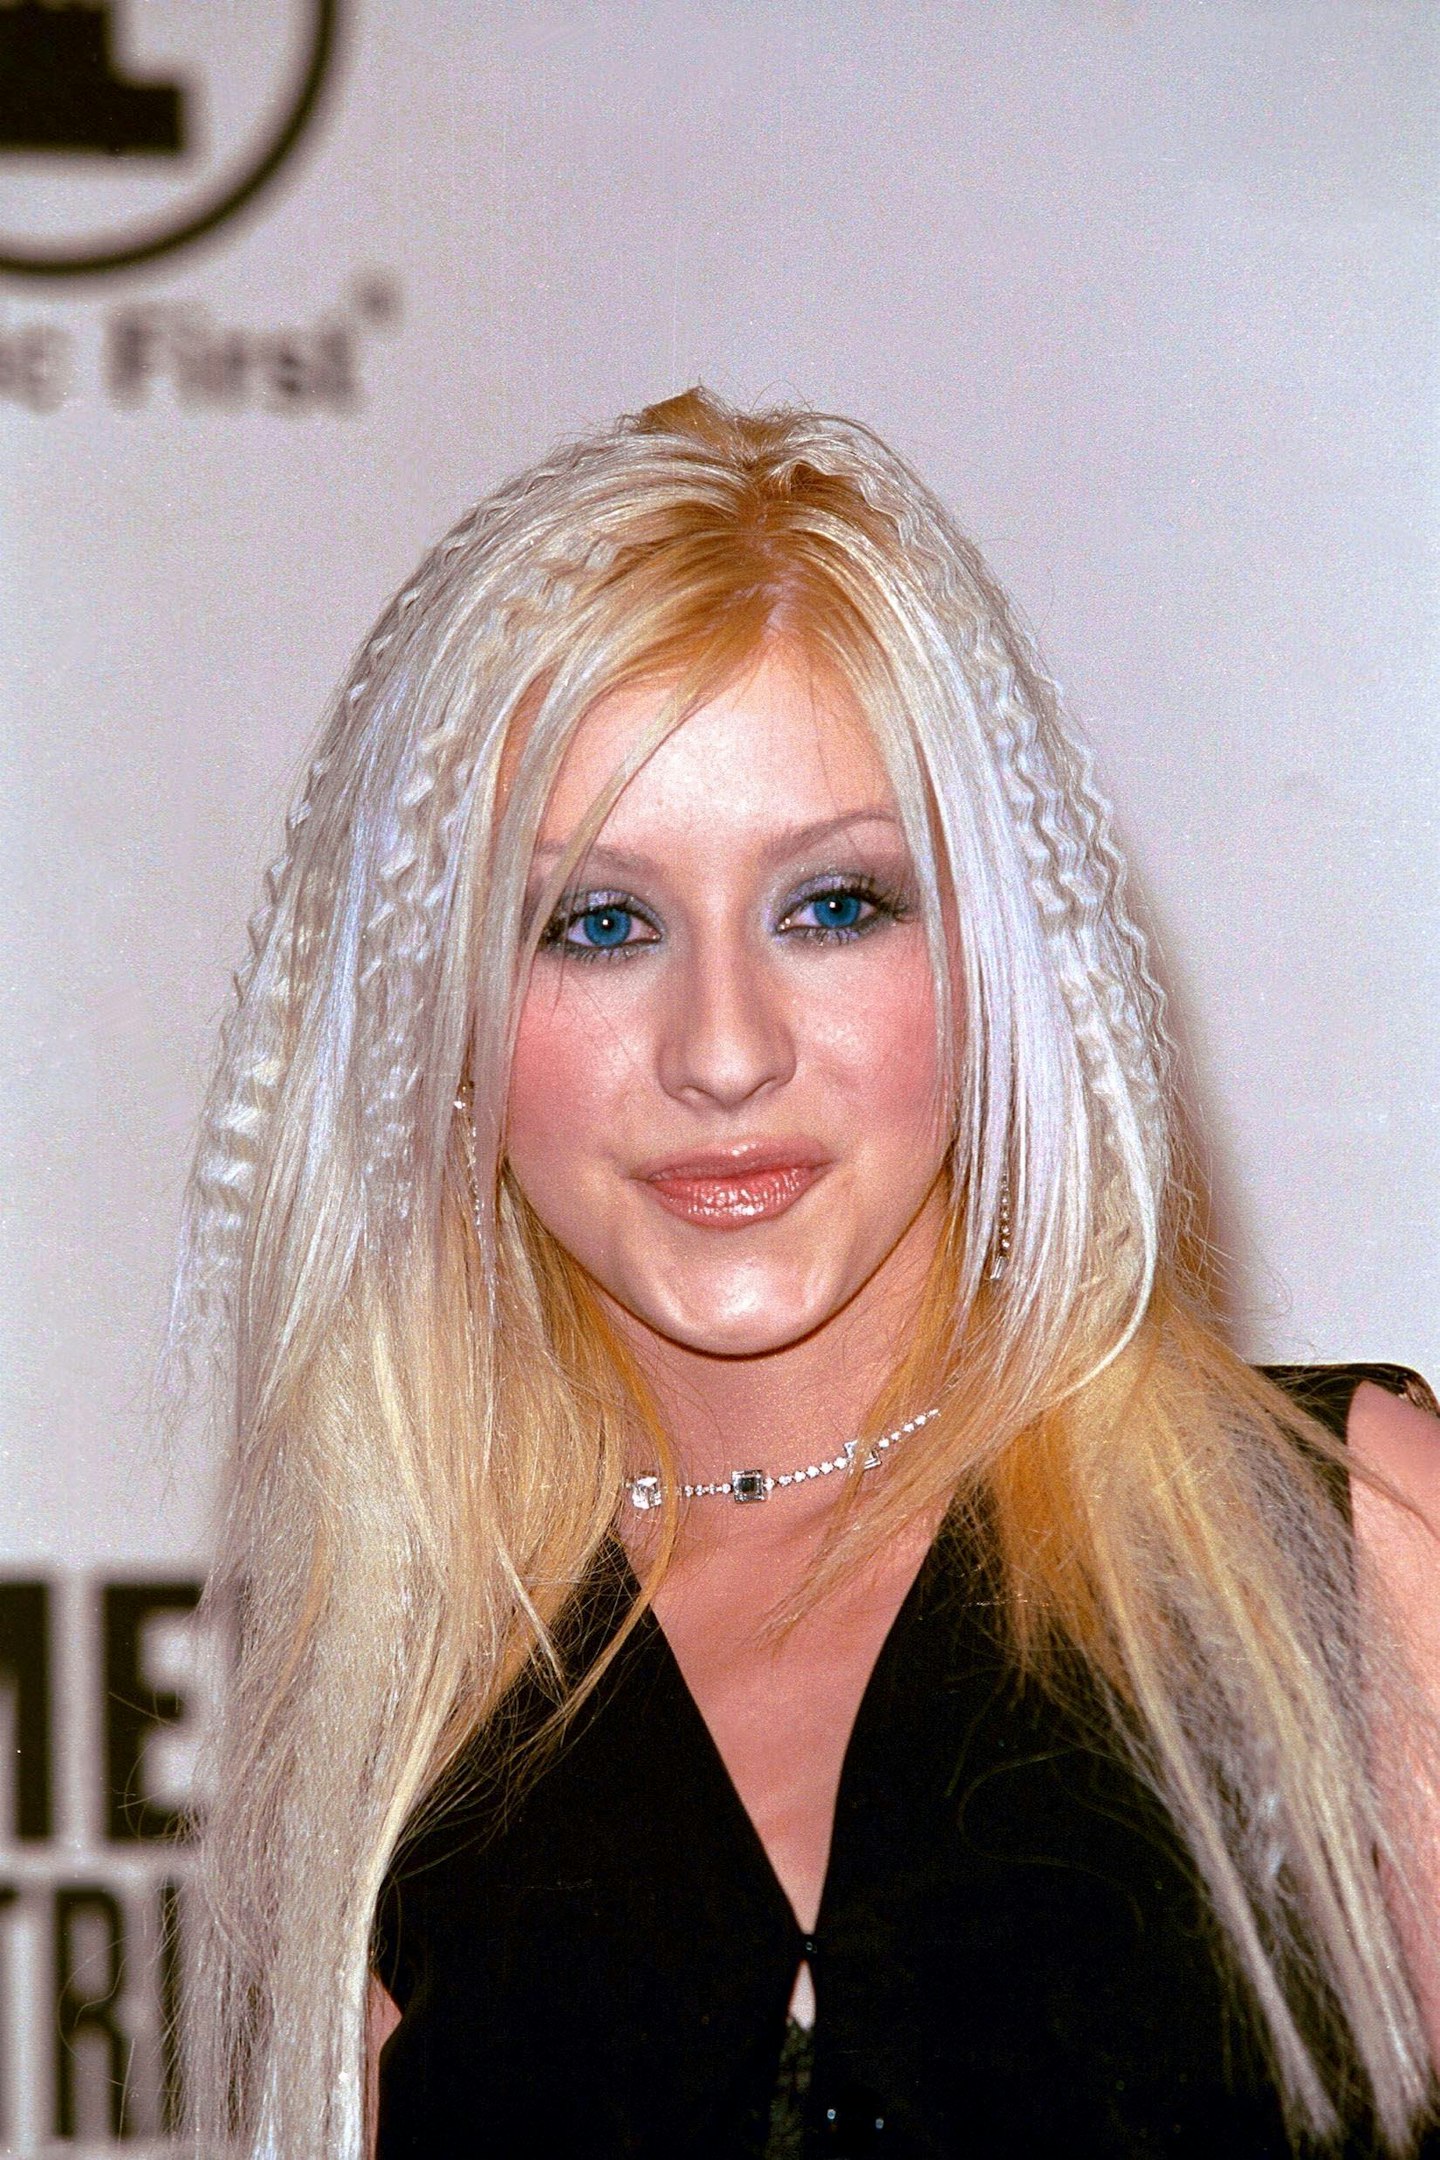 Christina Aguilera's Looks Over the Years